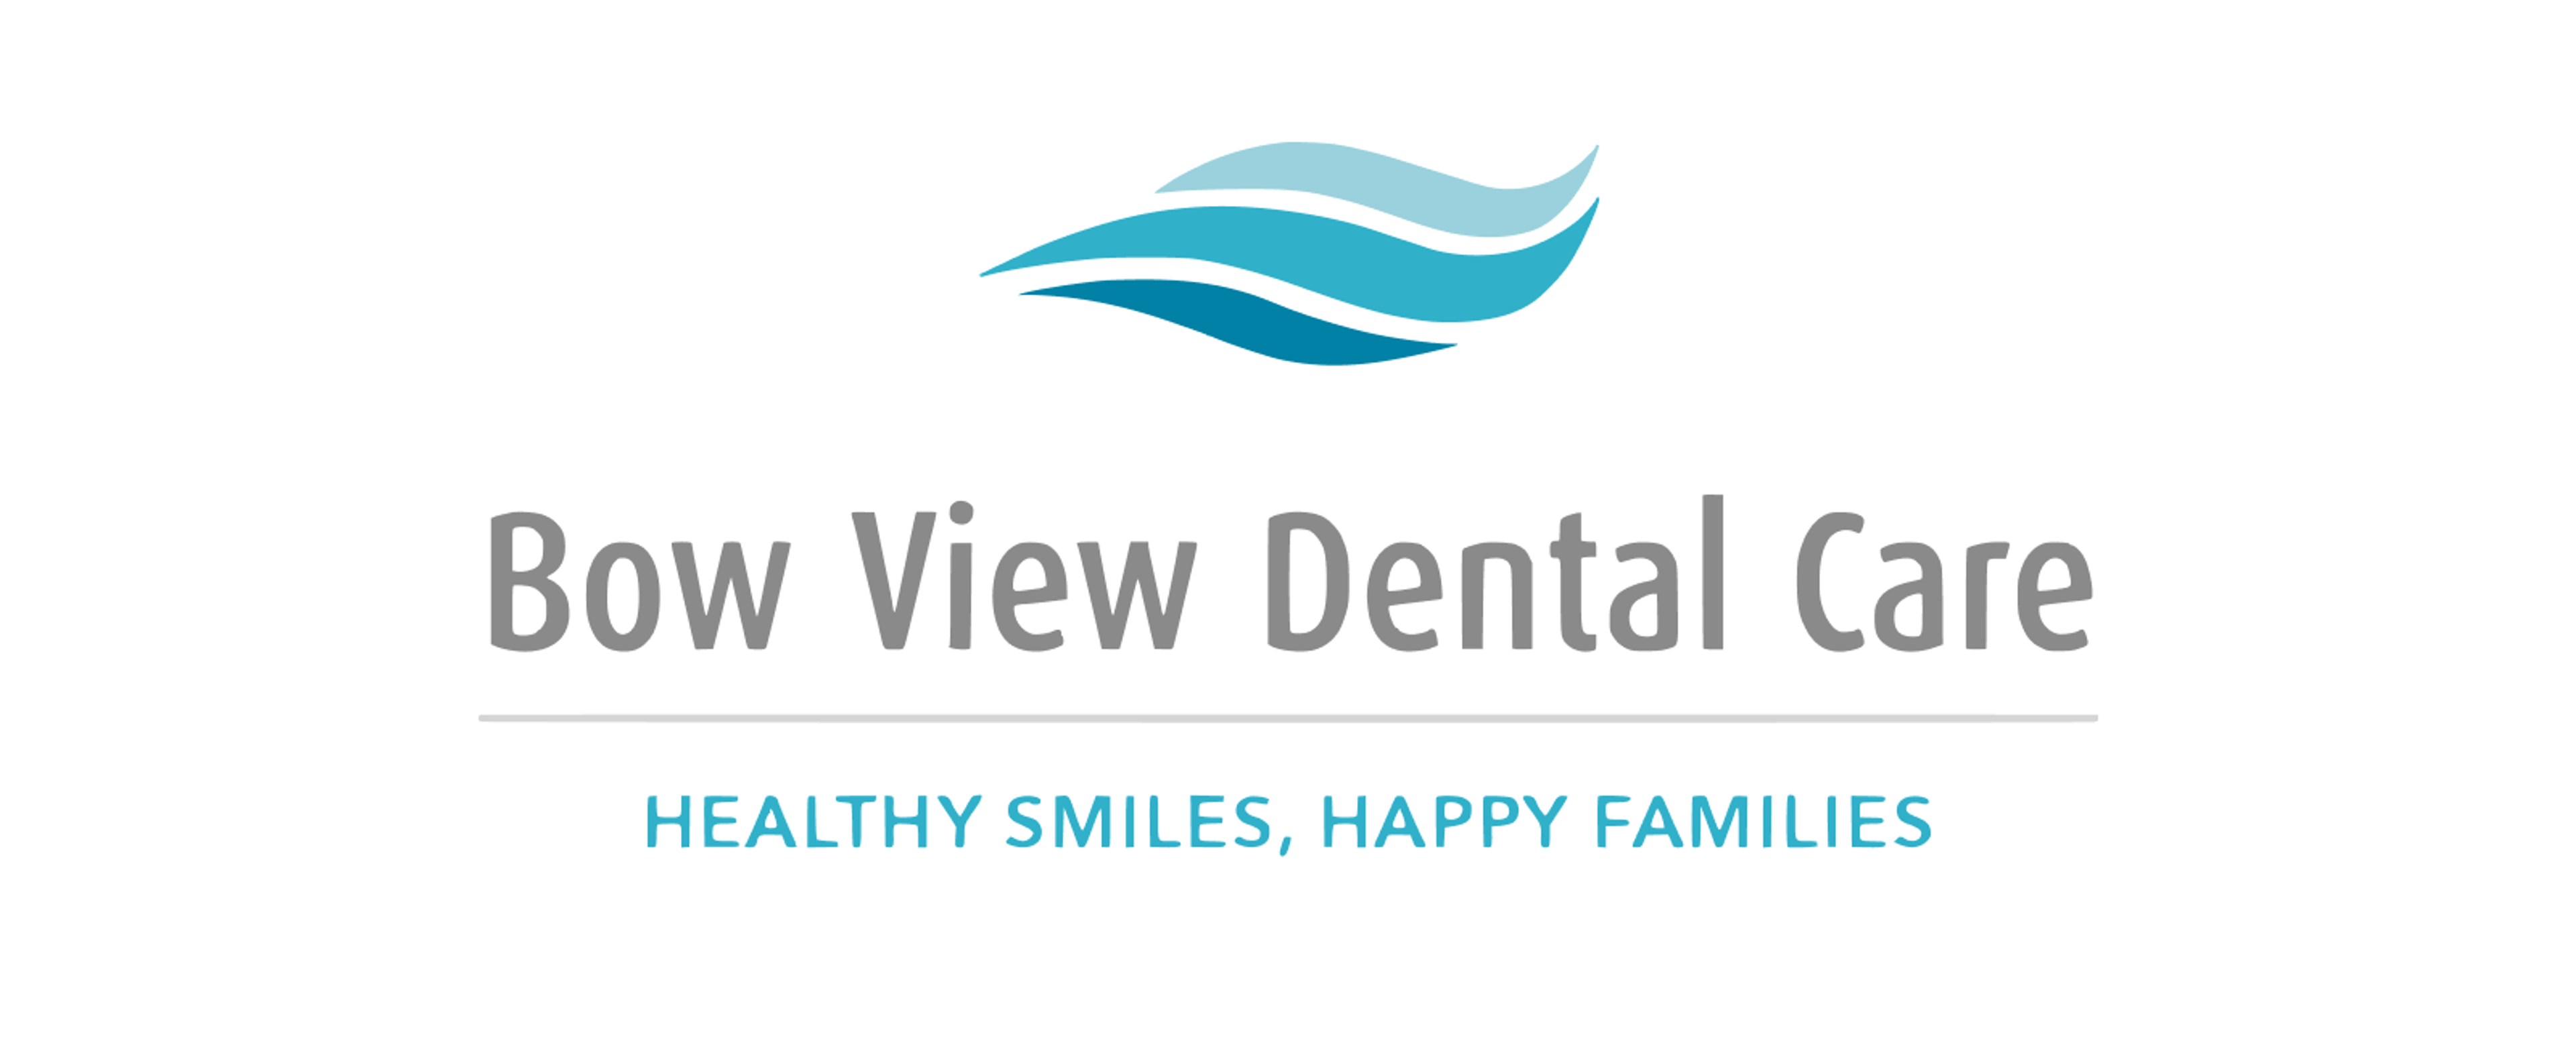 Bow View Dental Care logo on a padded white background